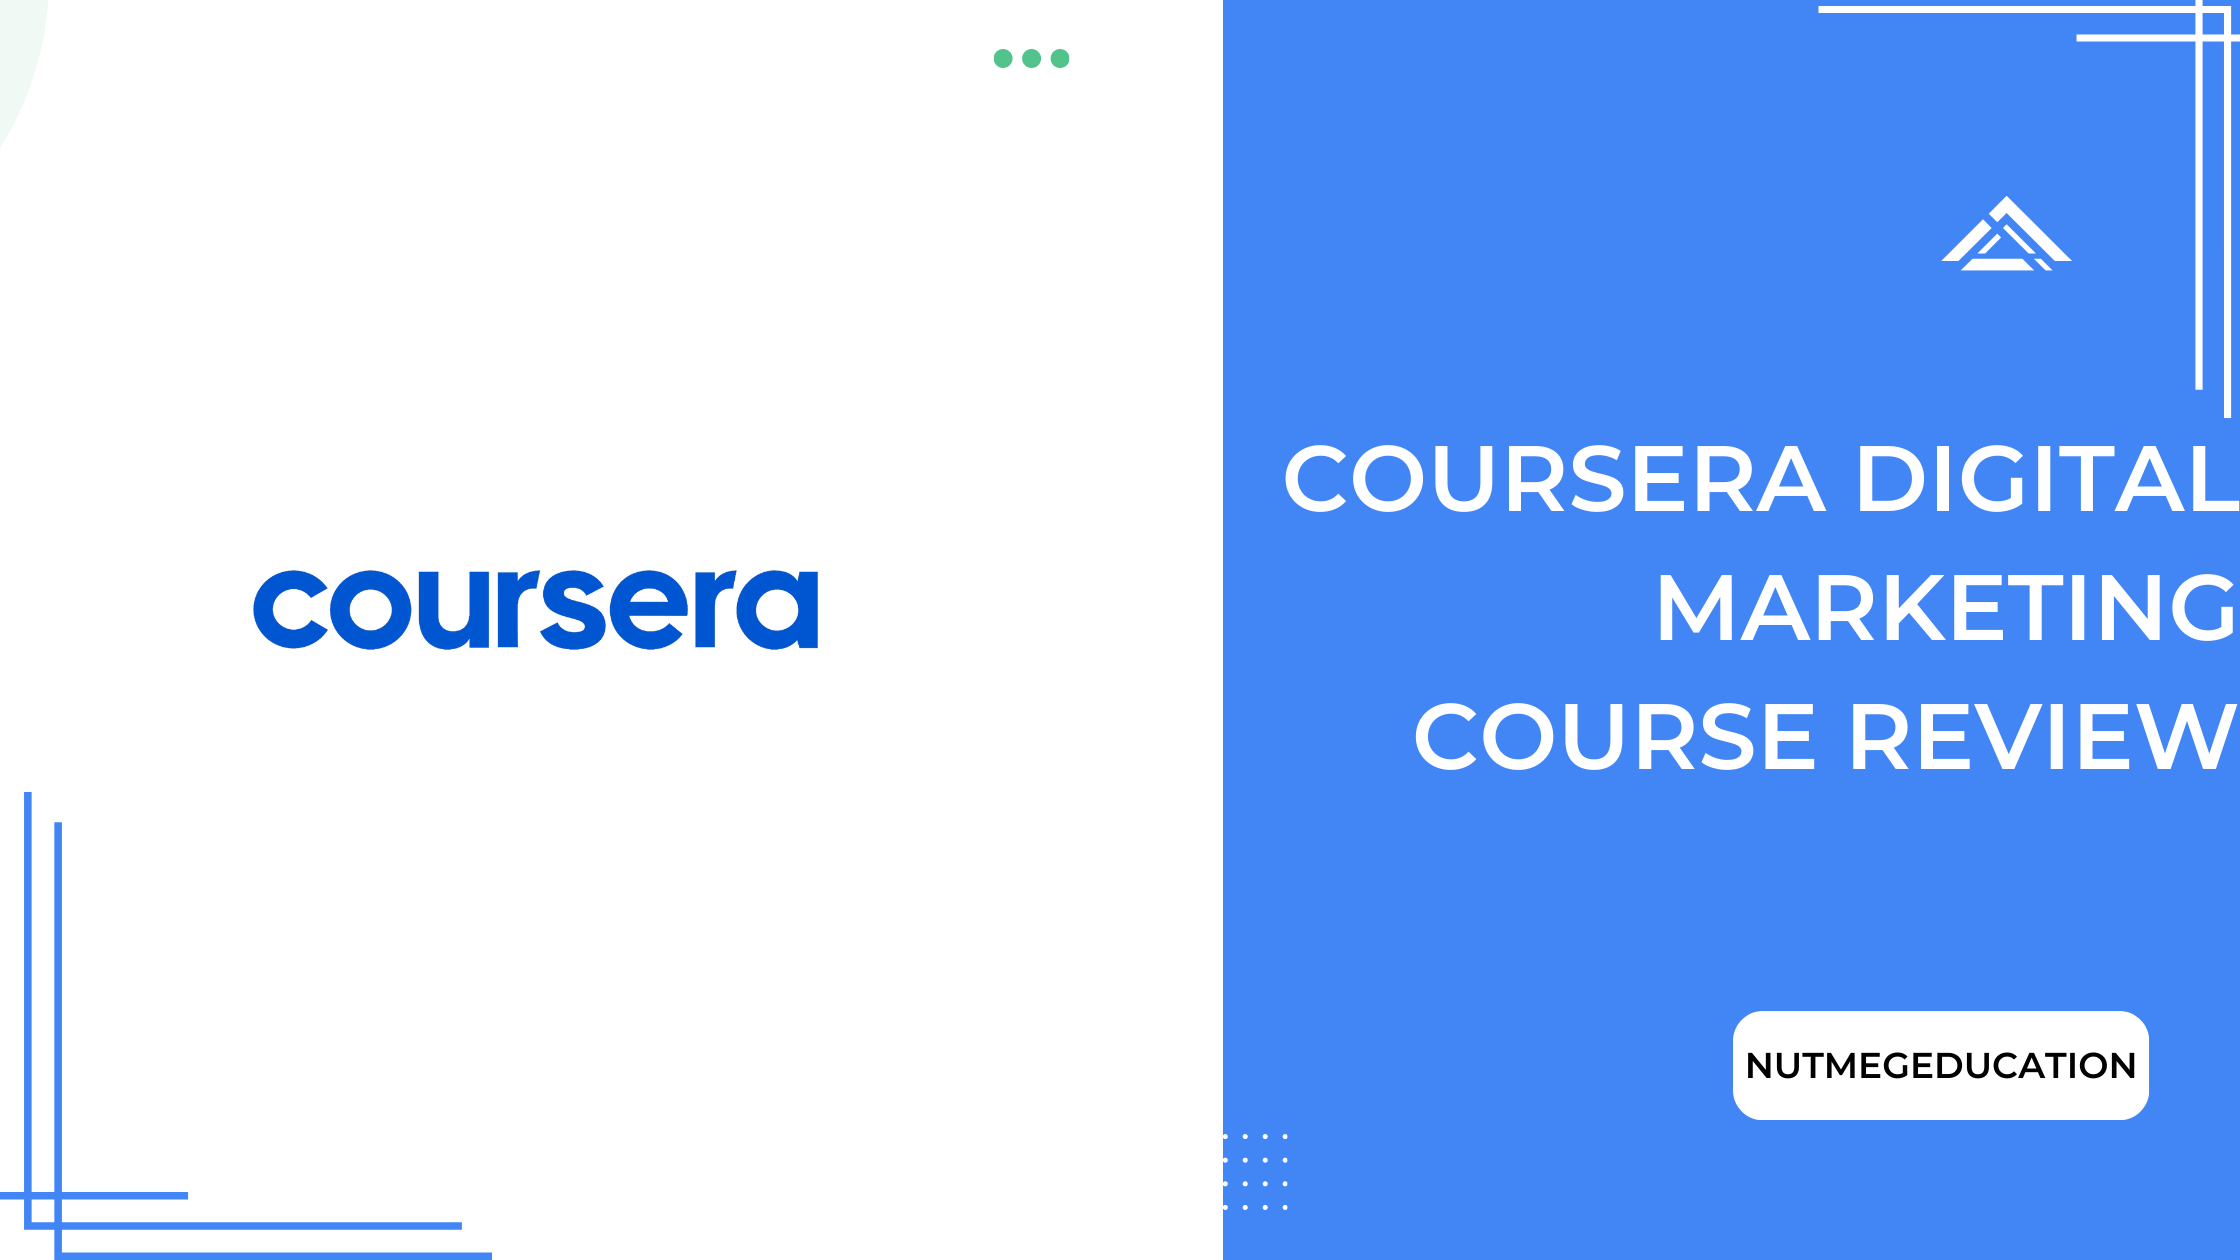 Coursera Digital Marketing Course Review - NutMegEducation